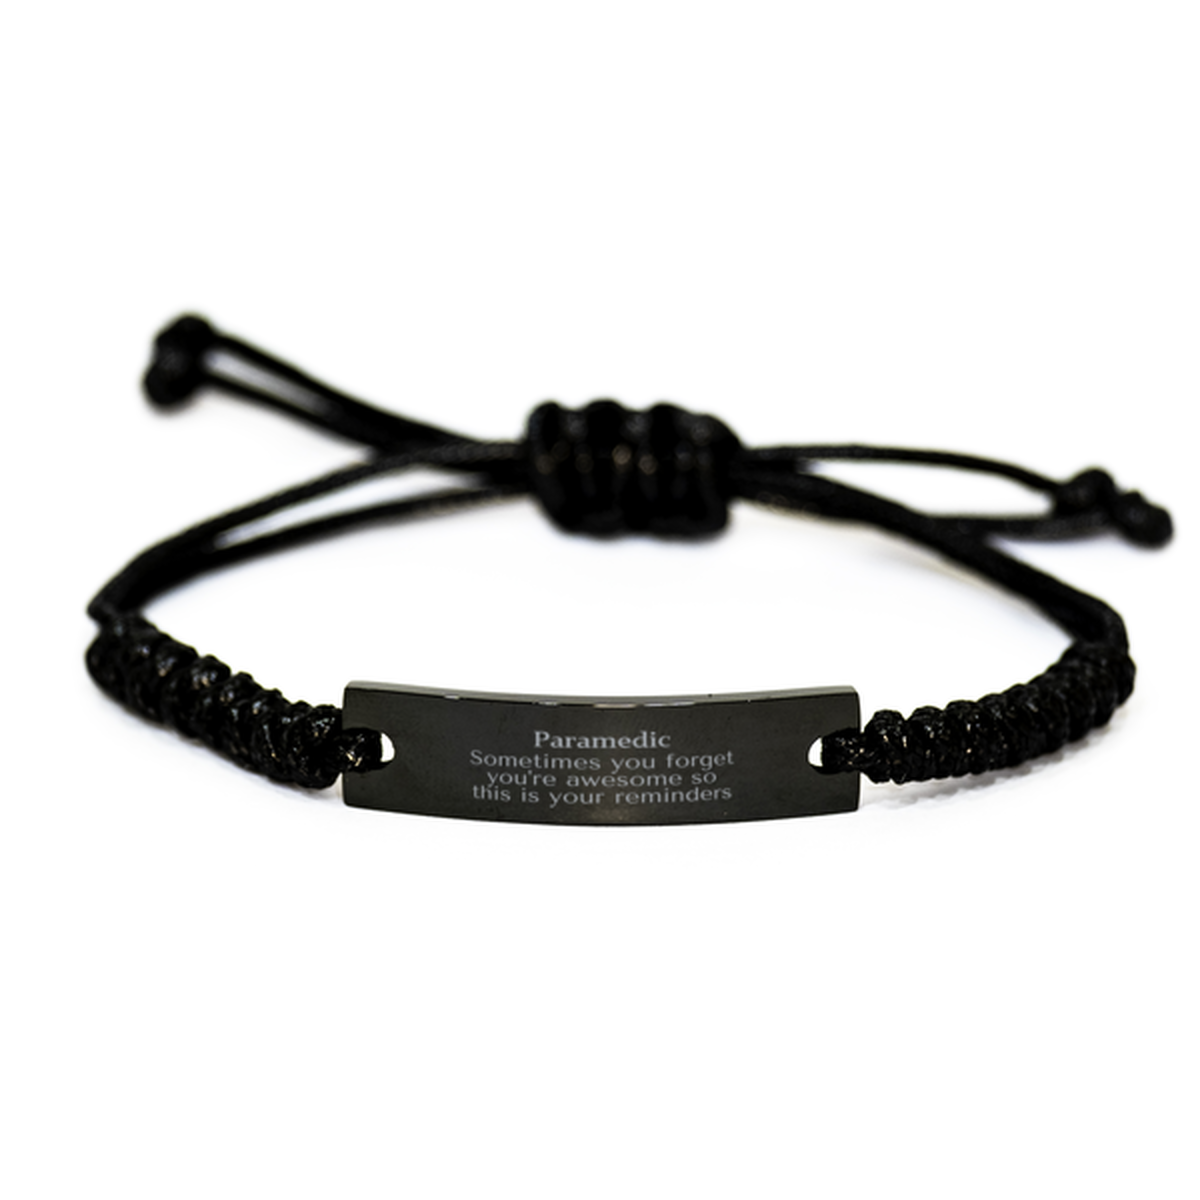 Sentimental Paramedic Black Rope Bracelet, Paramedic Sometimes you forget you're awesome so this is your reminders, Graduation Christmas Birthday Gifts for Paramedic, Men, Women, Coworkers